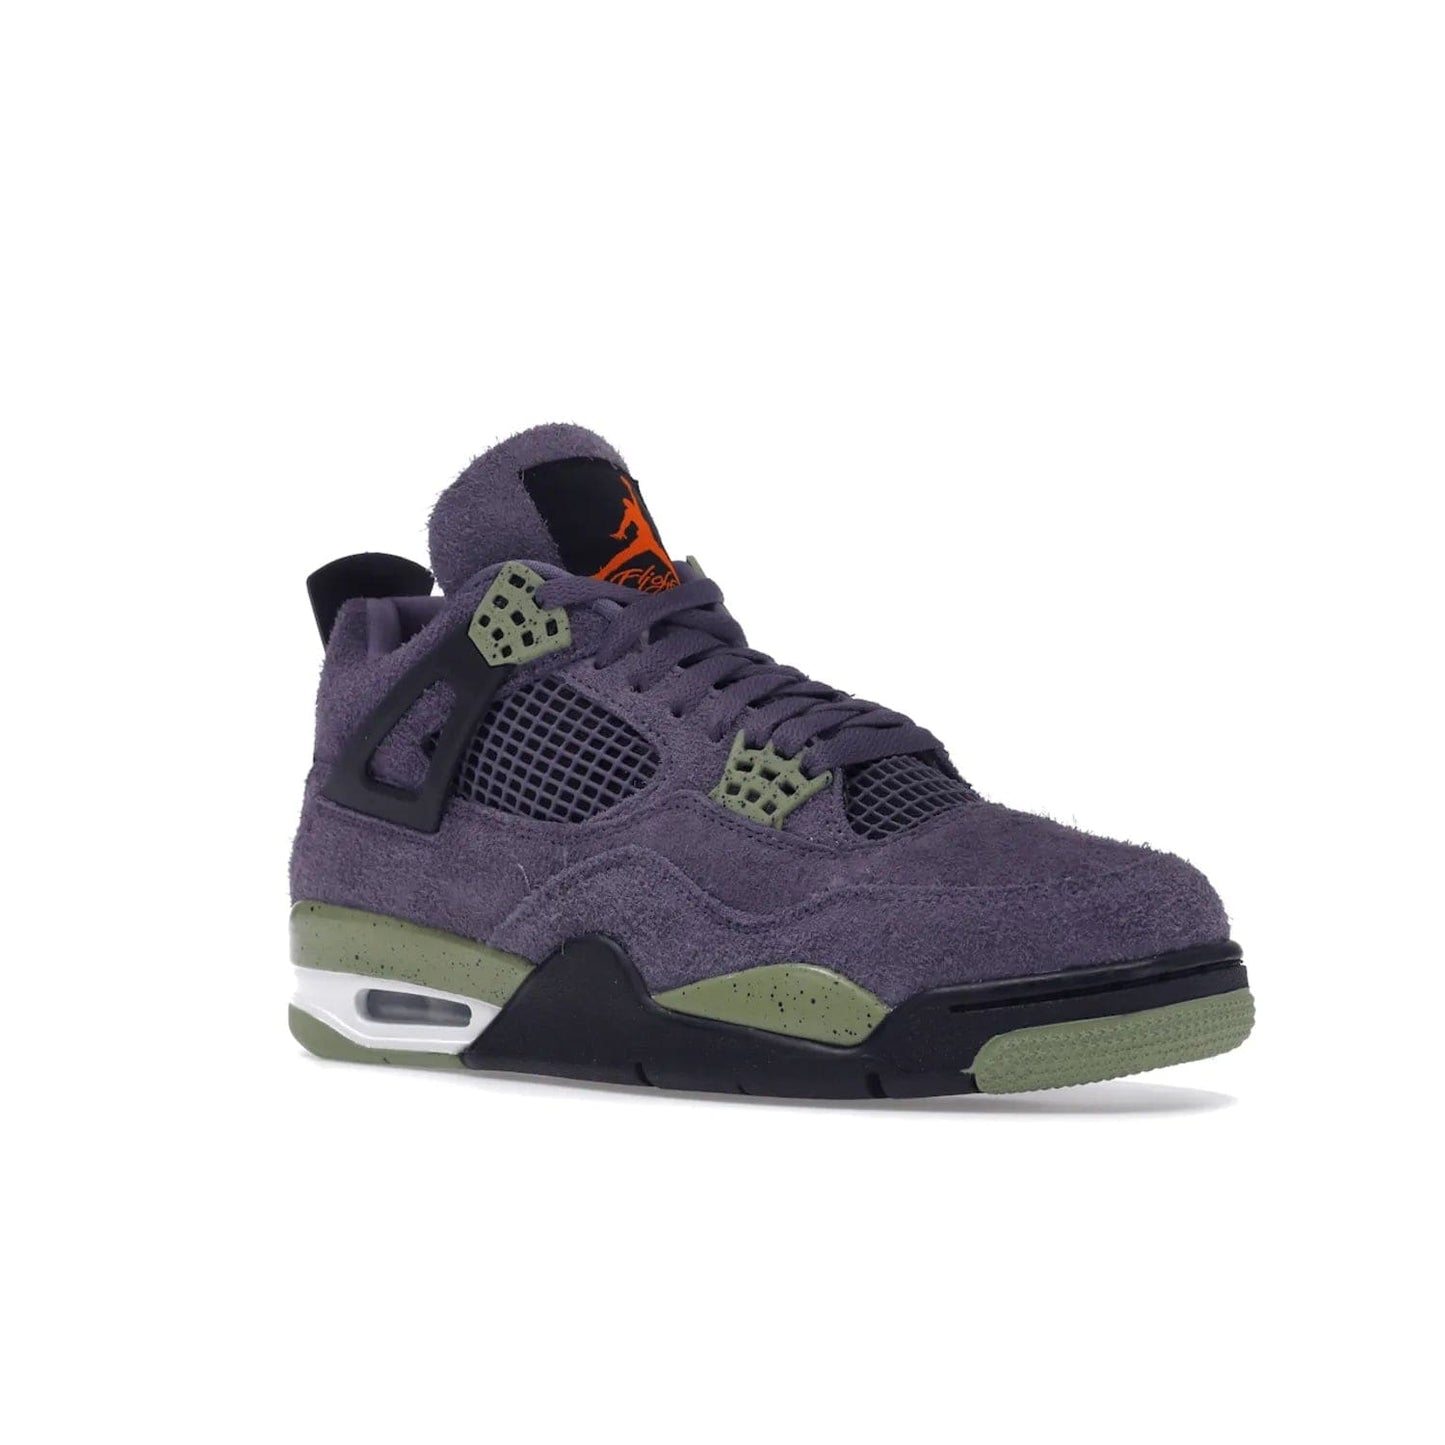 Jordan 4 Retro Canyon Purple (Women's) - Image 5 - Only at www.BallersClubKickz.com - New Air Jordan 4 Retro Canyon Purple W sneaker features shaggy purple suede, lime highlights & safety orange Jumpman branding. Classic ankle-hugging silhouette with modern colors released 15/10/2022.